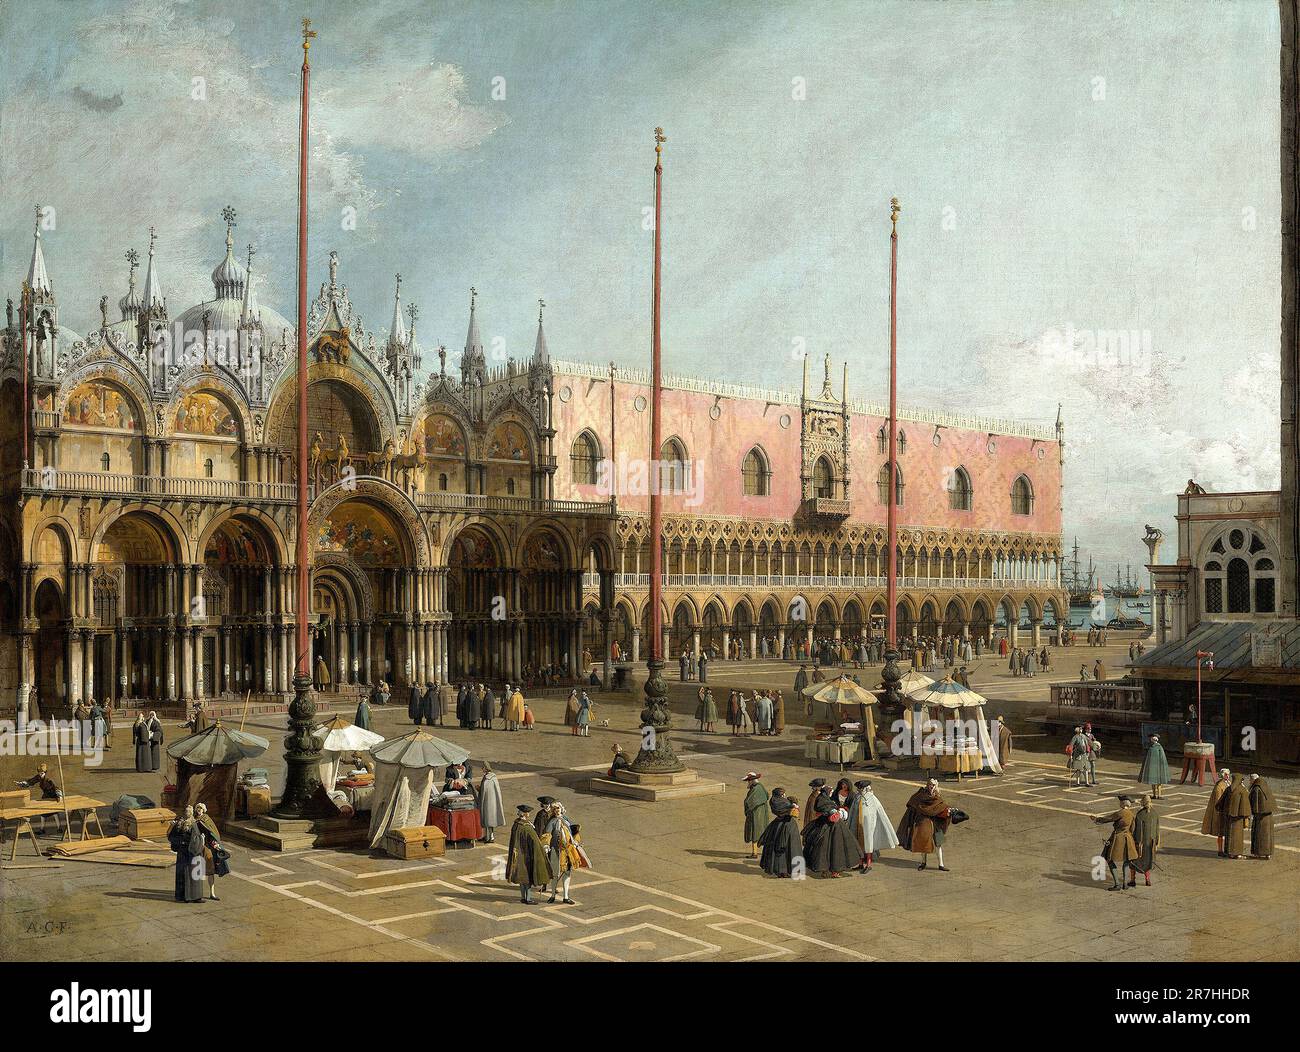 The Square of Saint Mark’s,Venice painted by the Venetian painter Giovanni Antonio Canal, commonly known as Canaletto, in 1742-1744 Stock Photo